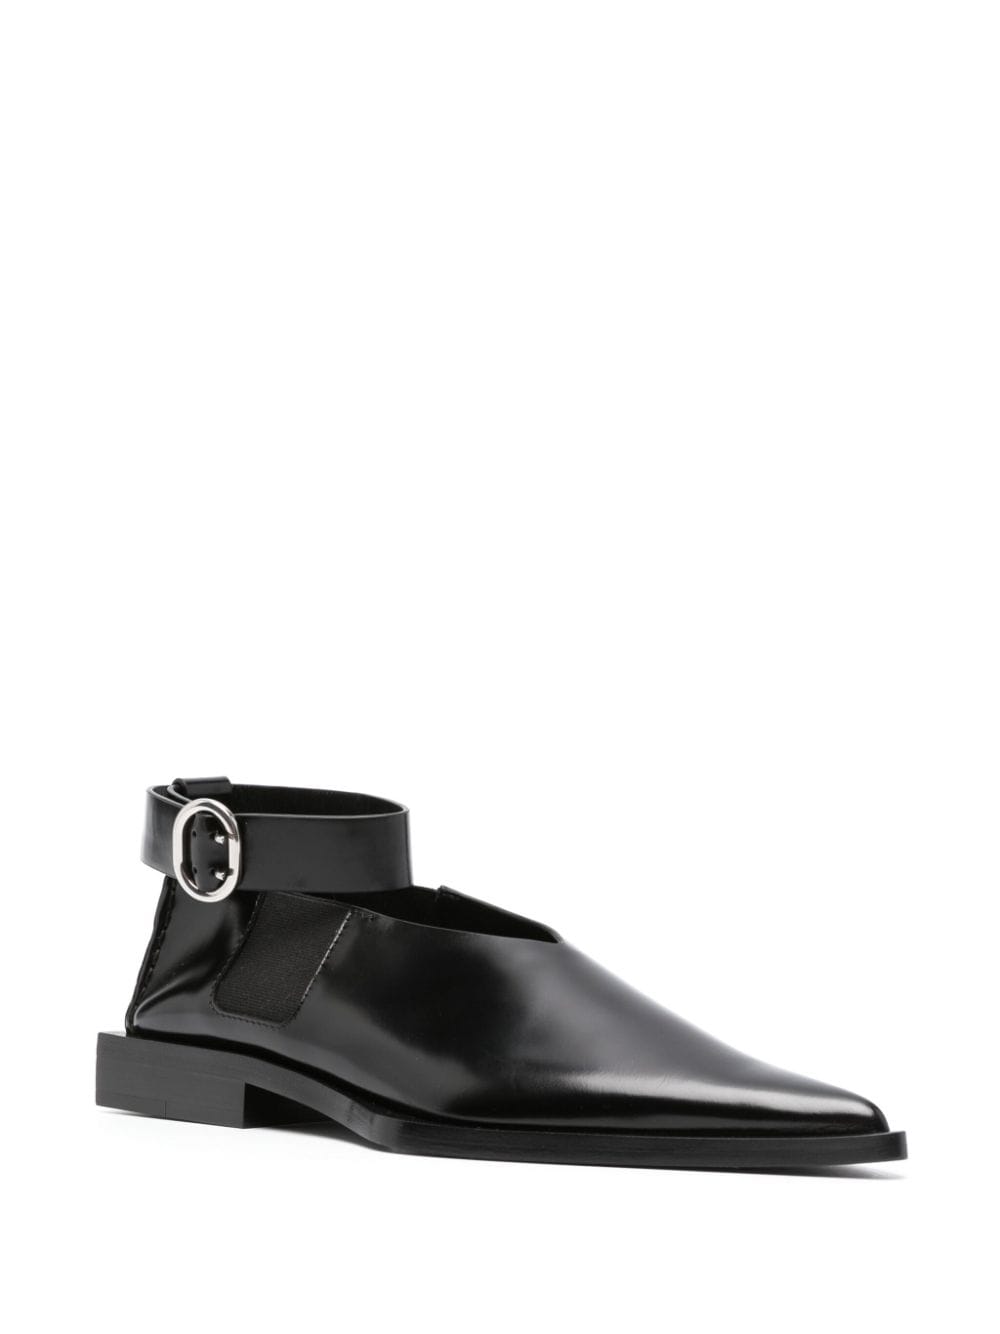 Image 2 of Jil Sander pointed-toe leather shoes